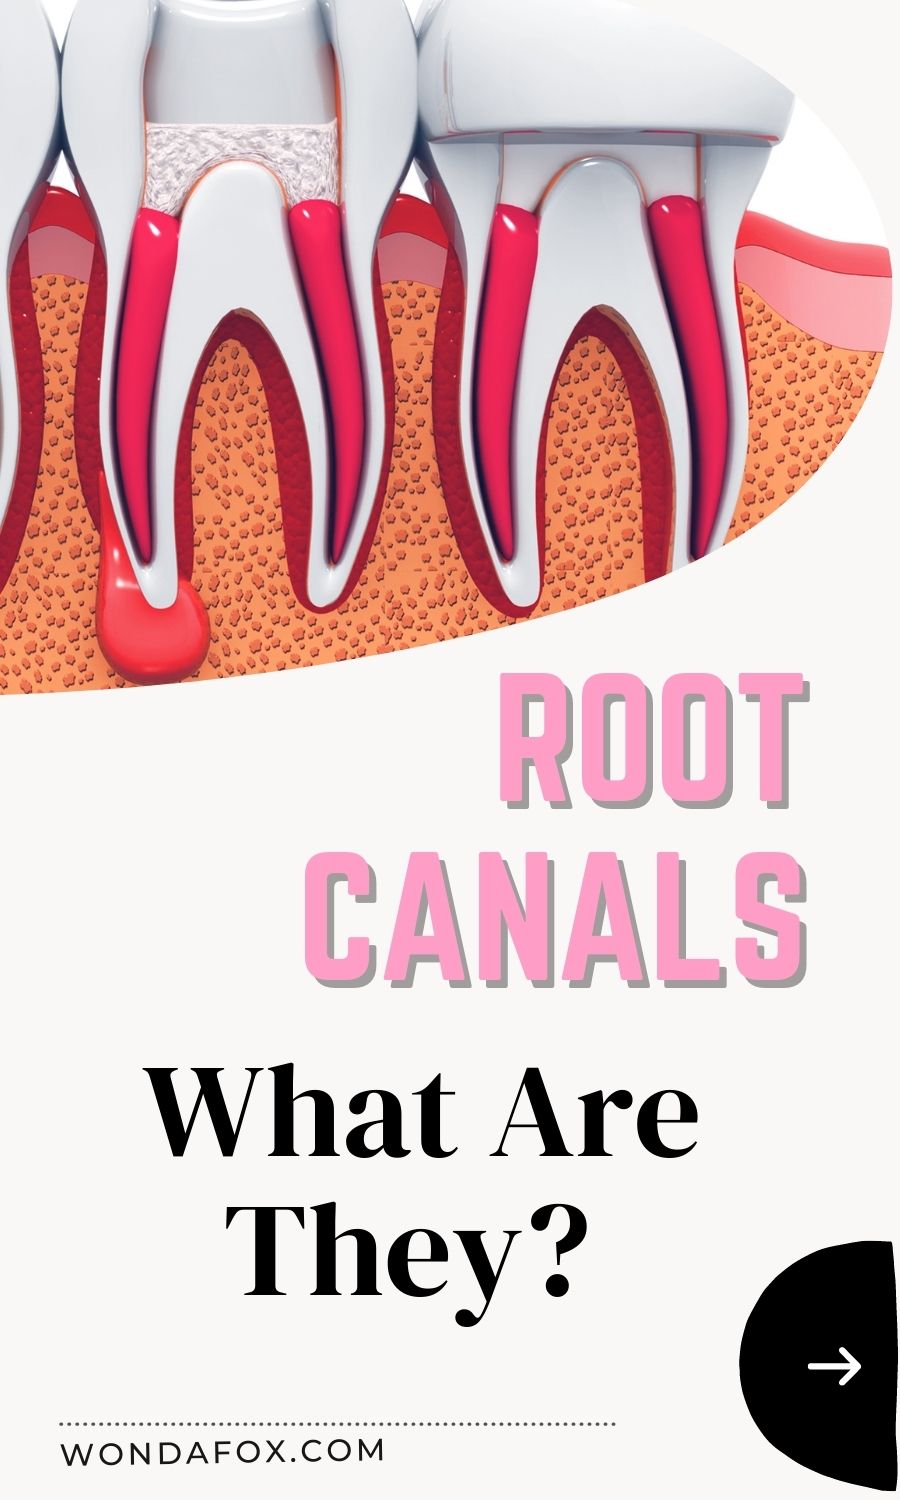 Root Canals: What Are They?